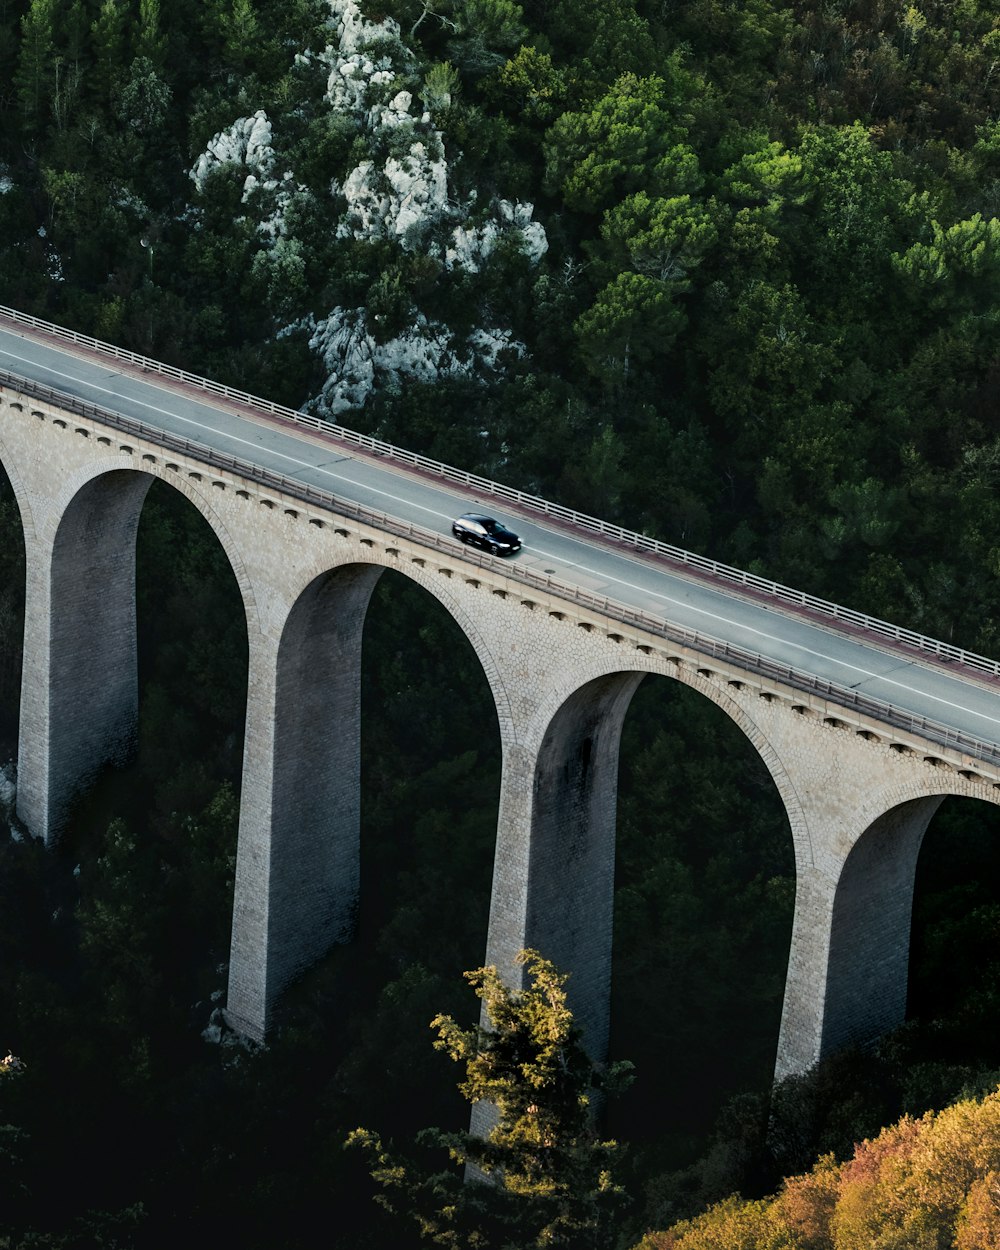 an overhead view of a bridge with a car on it